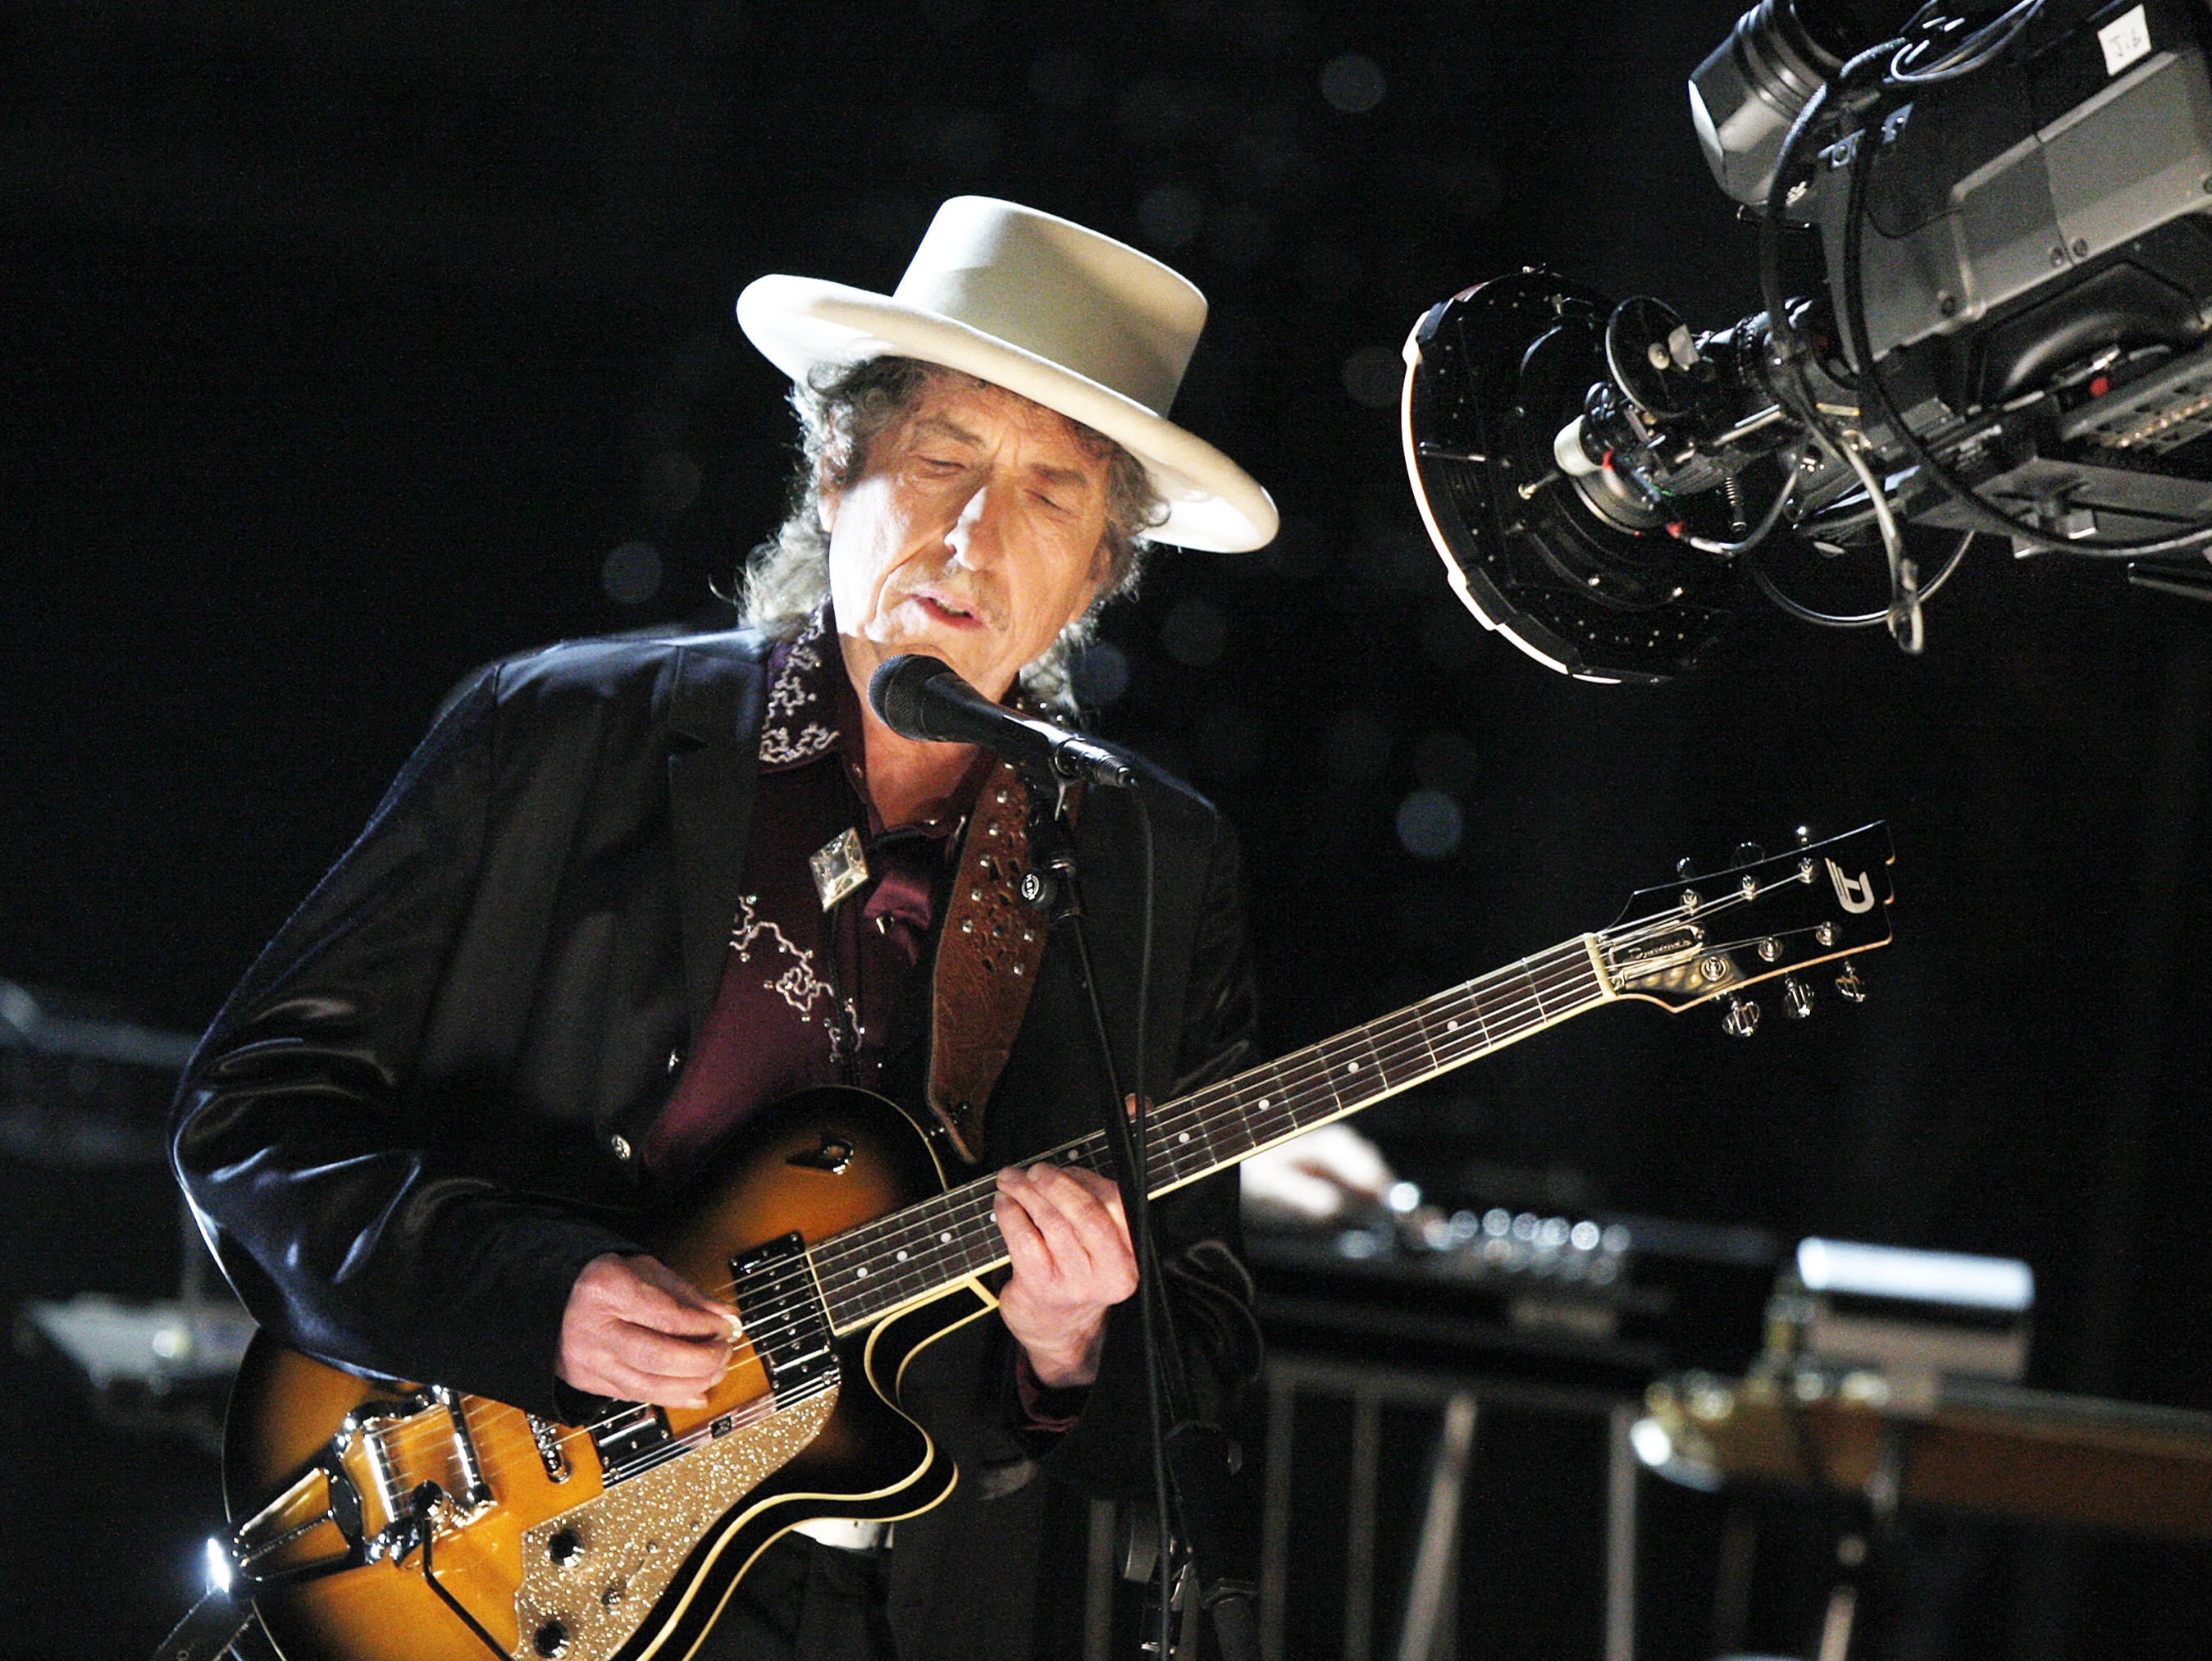 Bob Dylan’s representative vehemently denies the allegations against the musician